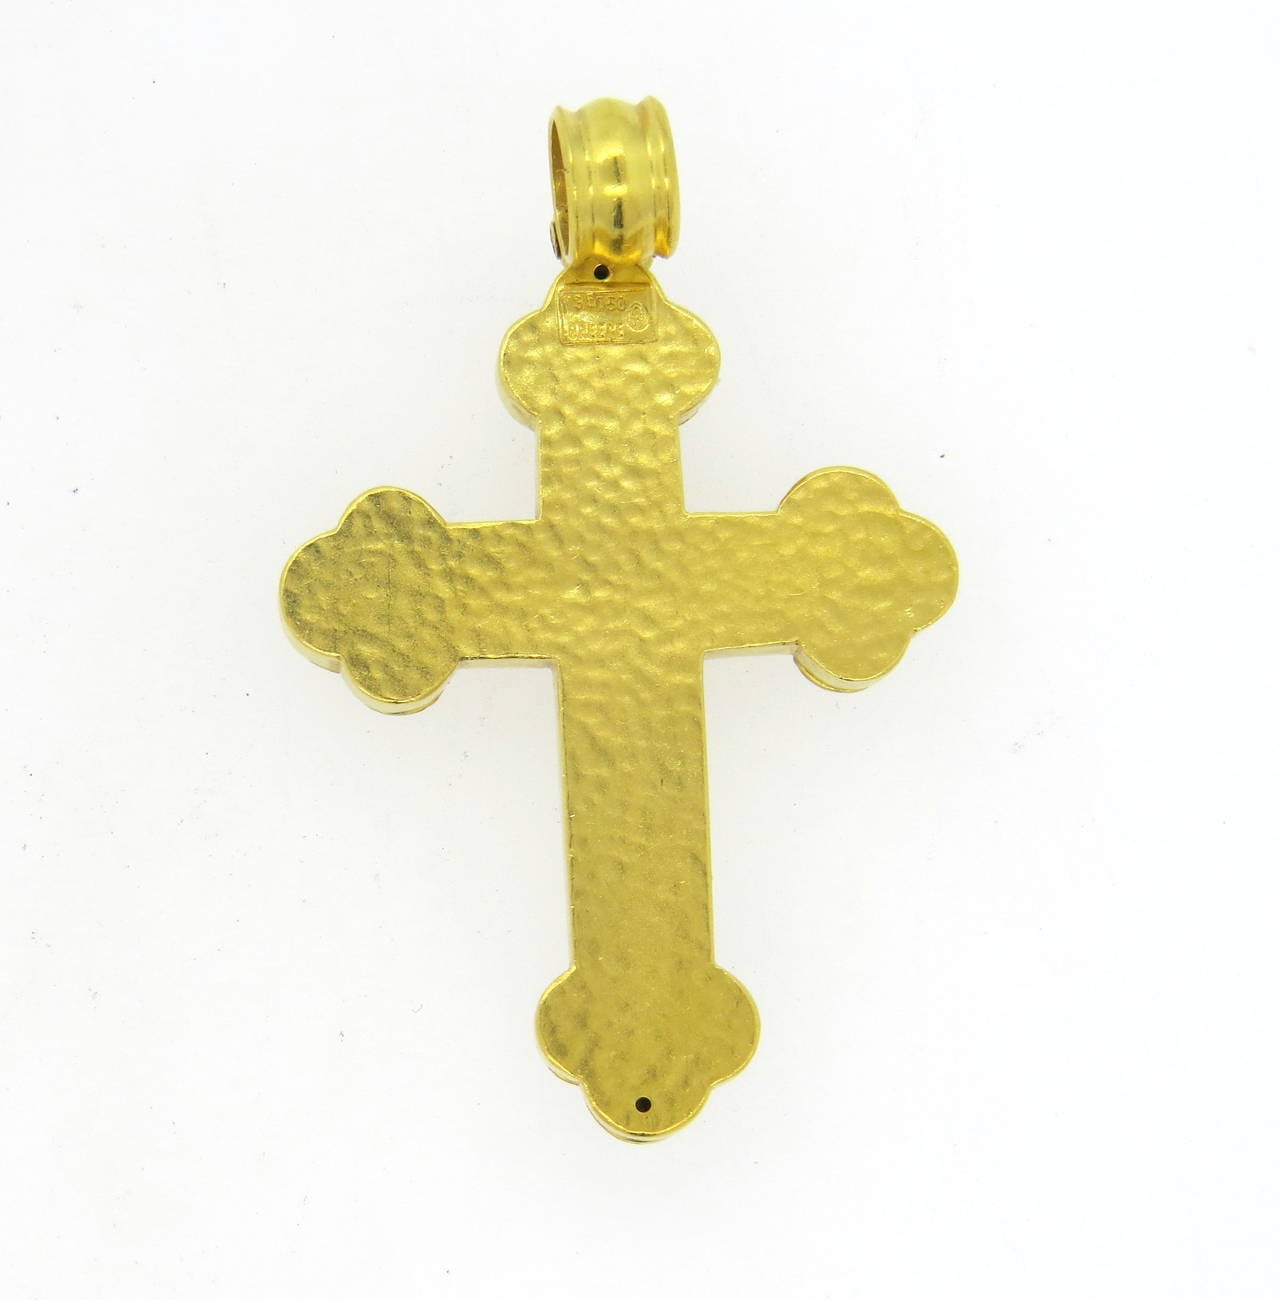 18k gold large cross pendant, crafted by Greek designed Ilias Lalaounis, featuring emerald cabochons and green enamel. Pendant measures 62mm long with bale x 38mm wide. Marked with makers mark,750, Greece. Weight of the piece - 20.3 grams